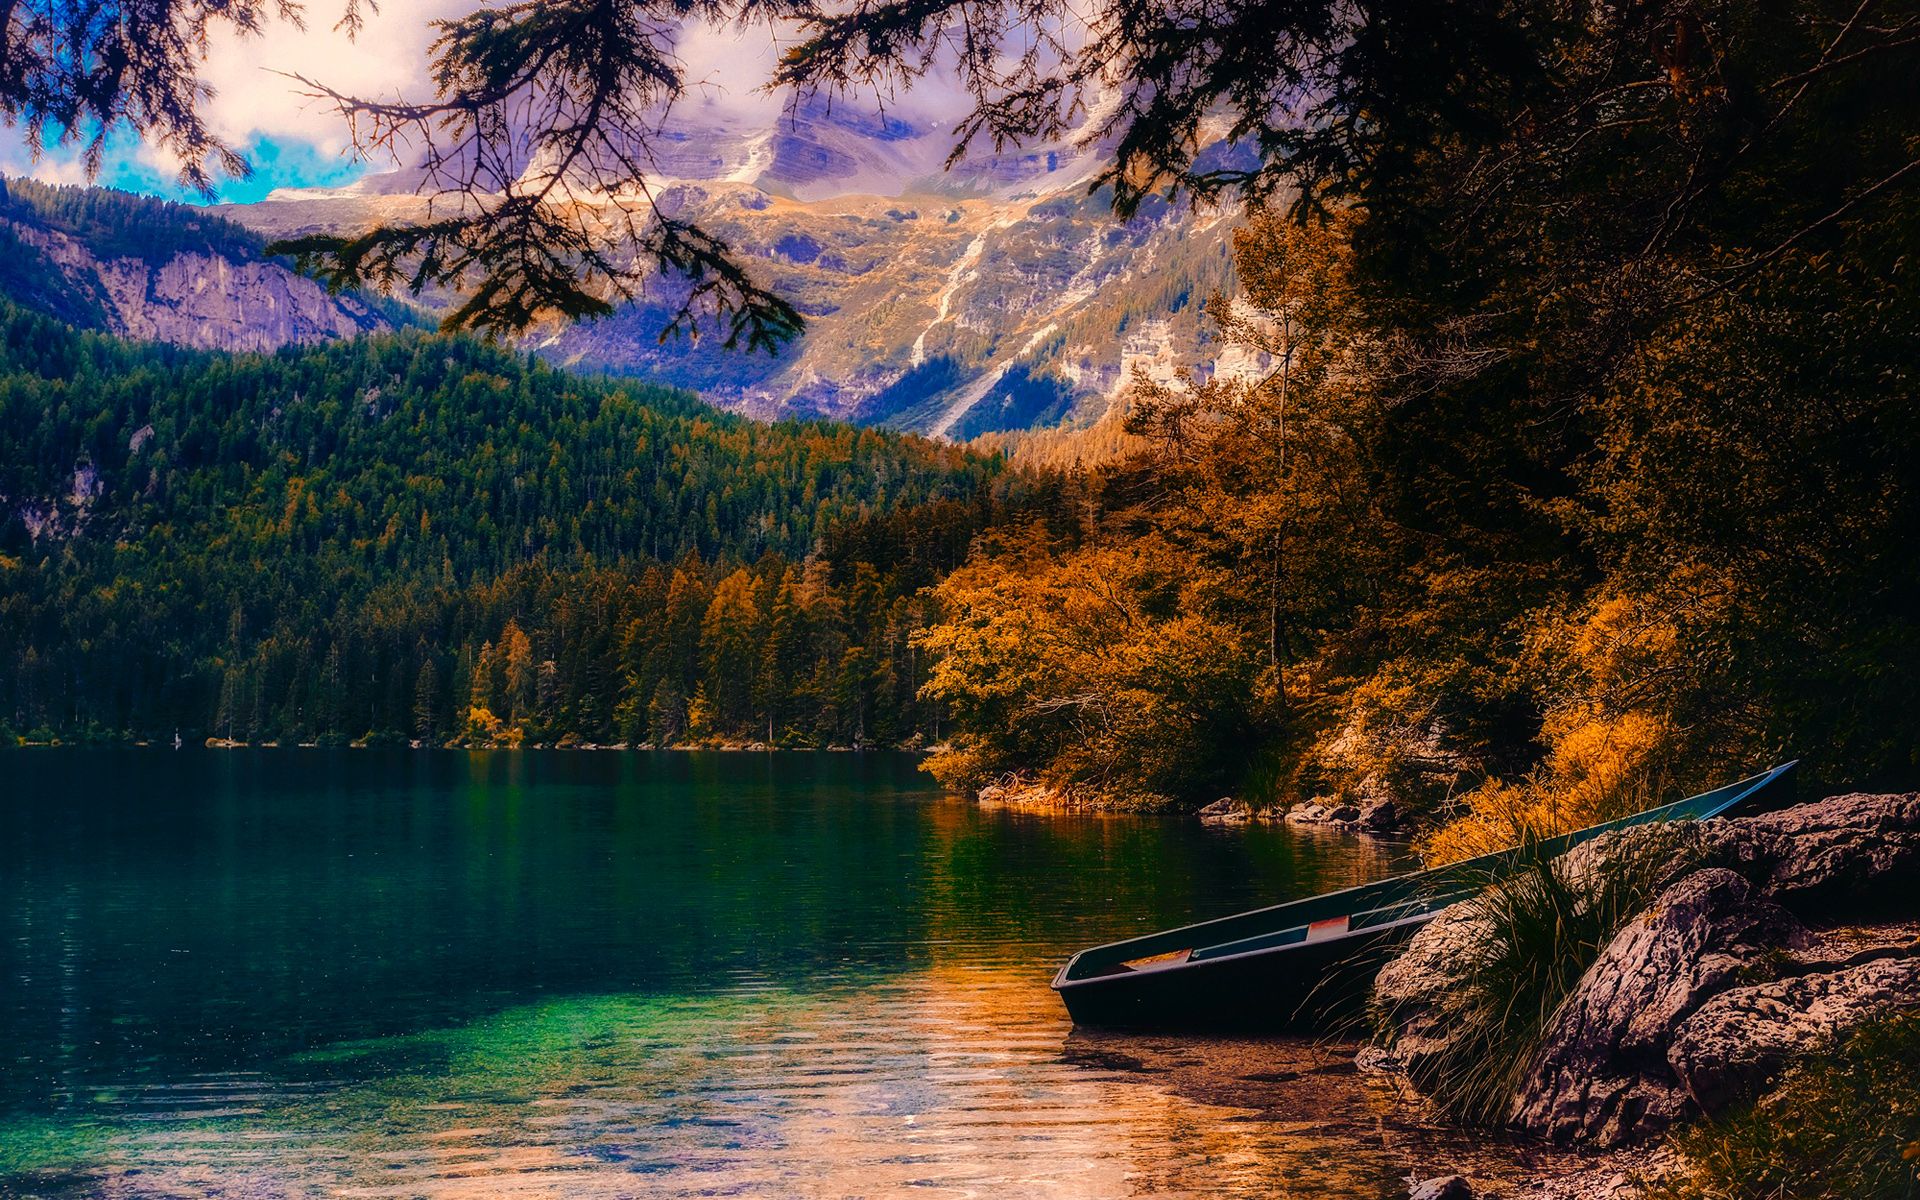 Download wallpaper Italy, lake, forest, autumn, HDR, mountains, Europe for desktop with resolution 1920x1200. High Quality HD picture wallpaper